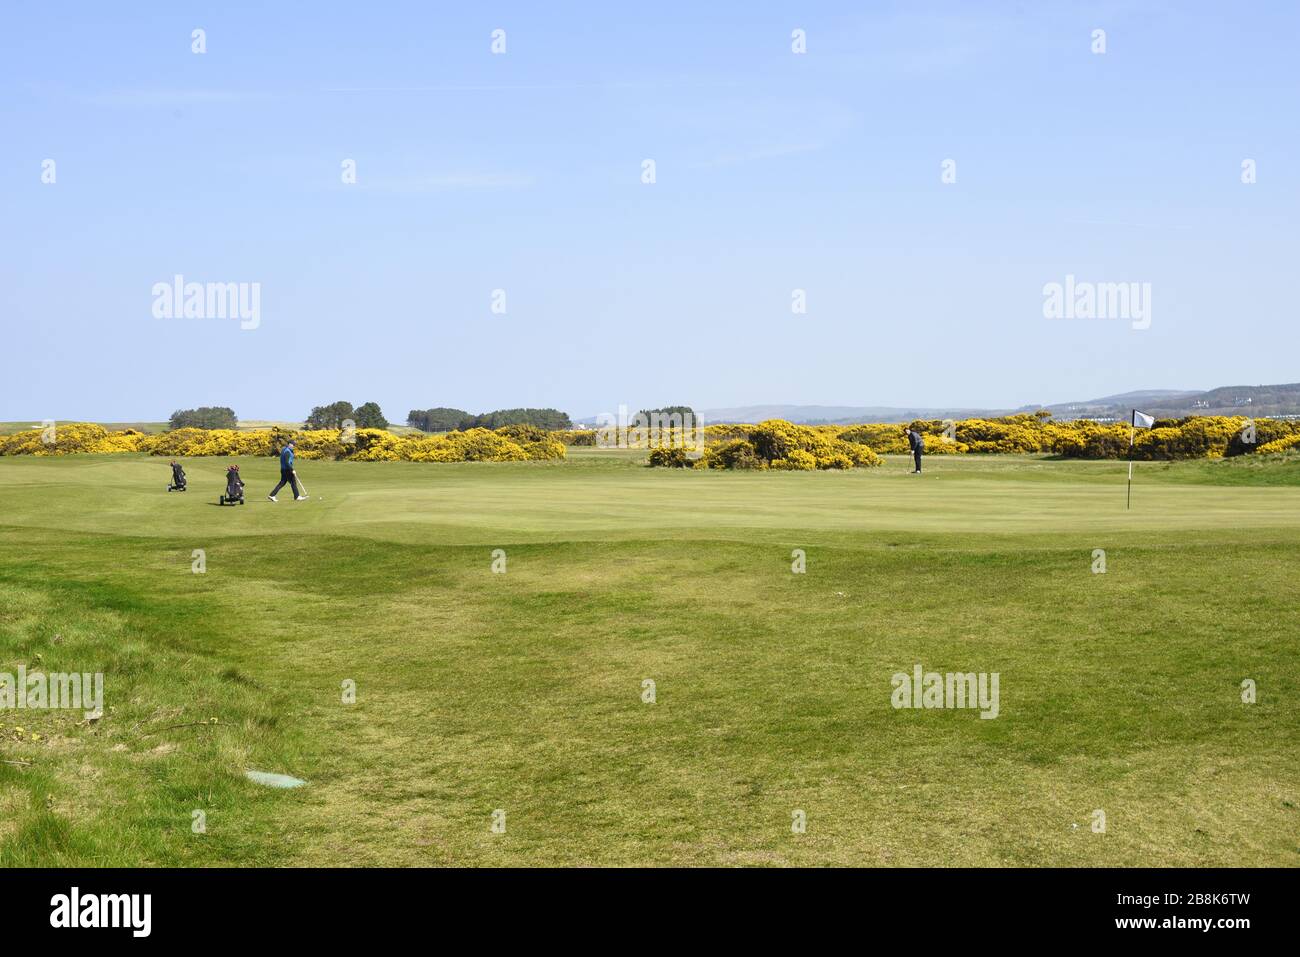 Golf players at Turnberry Golf Course, famously owner by Donald Trump. Near Maybole, South Ayrshire, Scotland Stock Photo